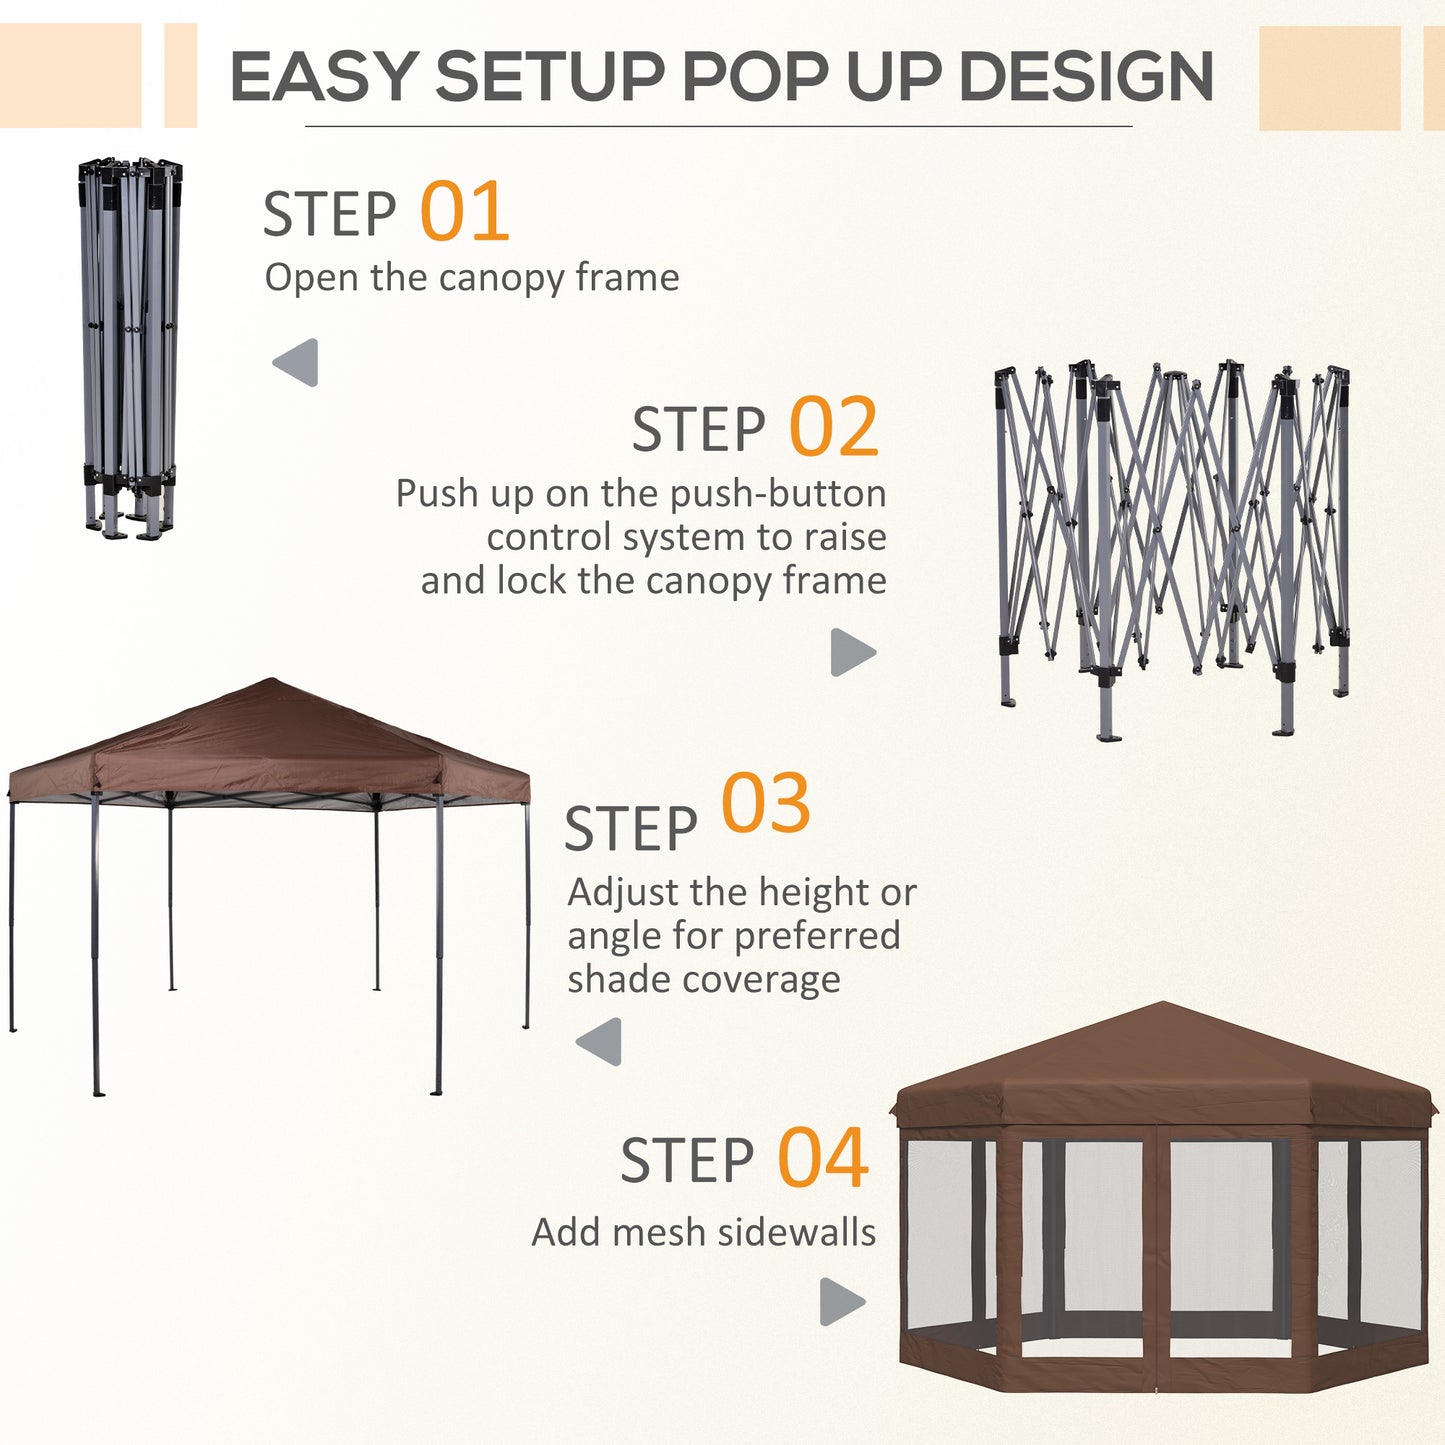 Outsunny 3x3.5m Hexagonal Pop Up Gazebo Party Canopy Height Adjustable Tent Sun Shelter w/ Mosquito Netting Zipped Door, Brown